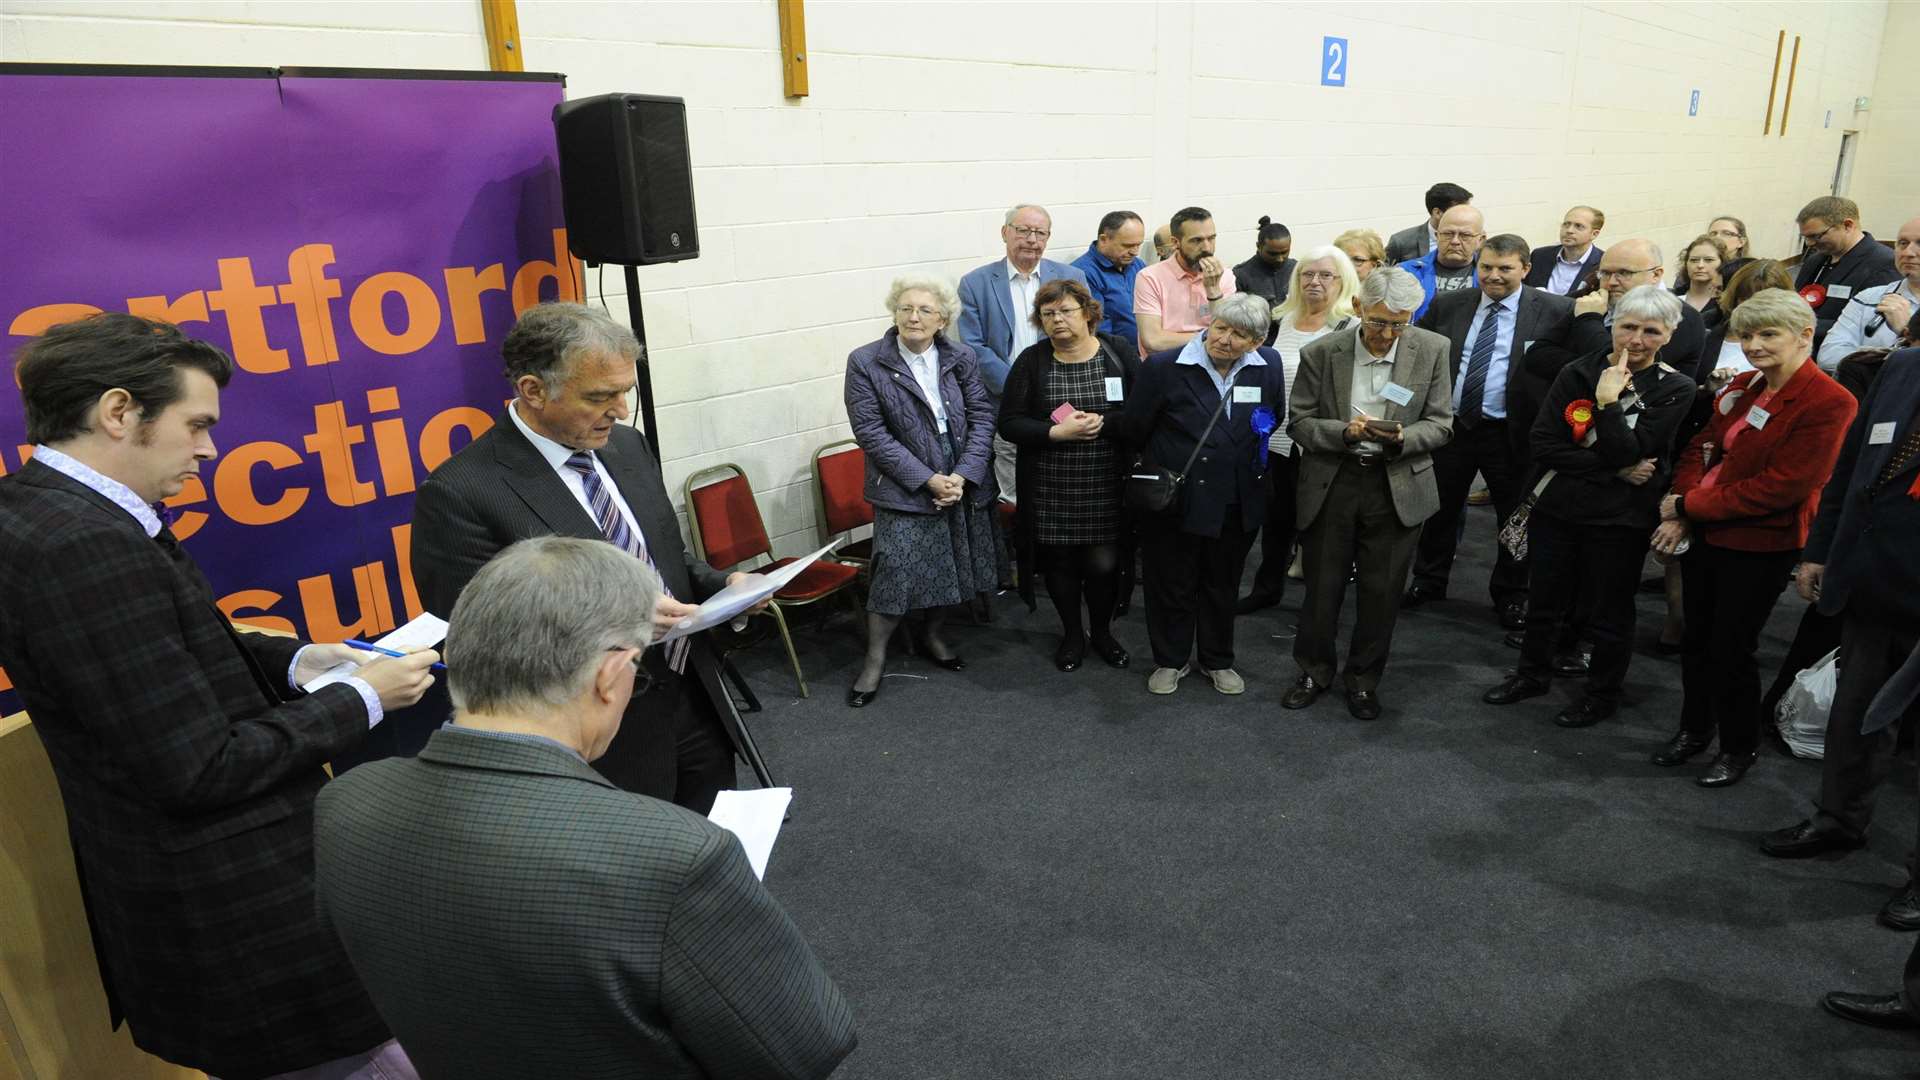 Results being announced at the Dartford count